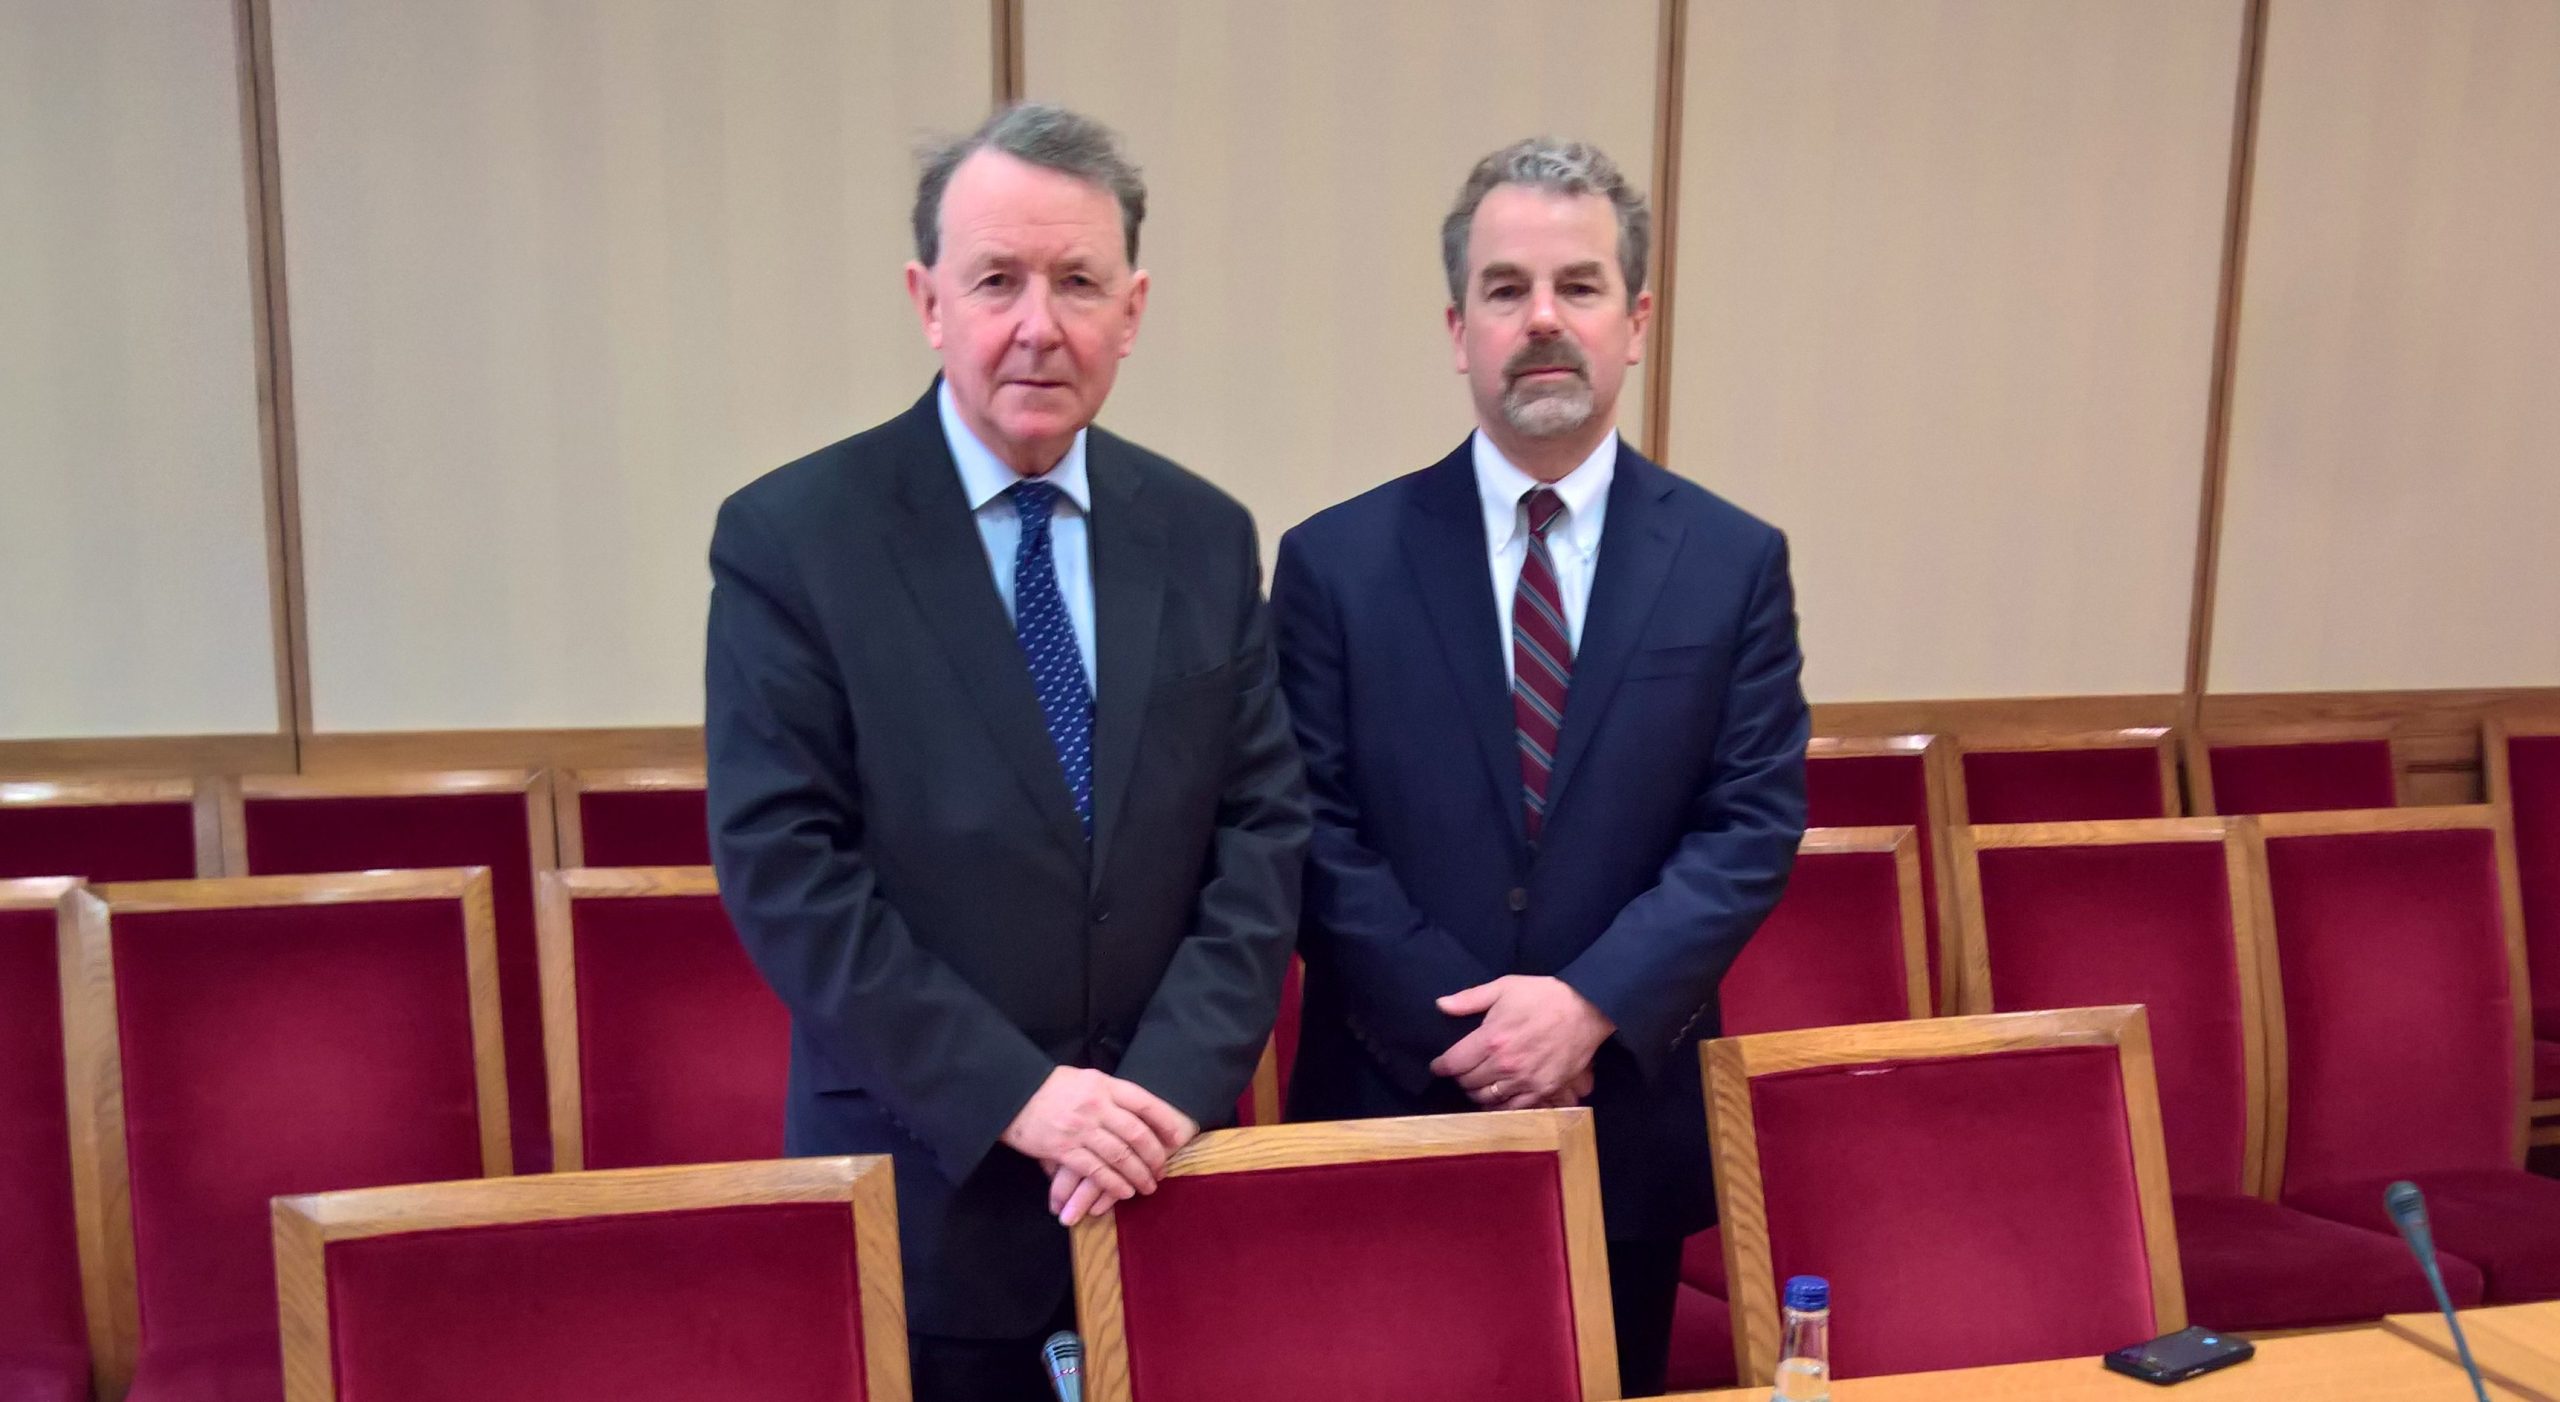 Lord Alton with Stephen Rasche, following the meeting in parliament. (© Aid to the Church in Need)